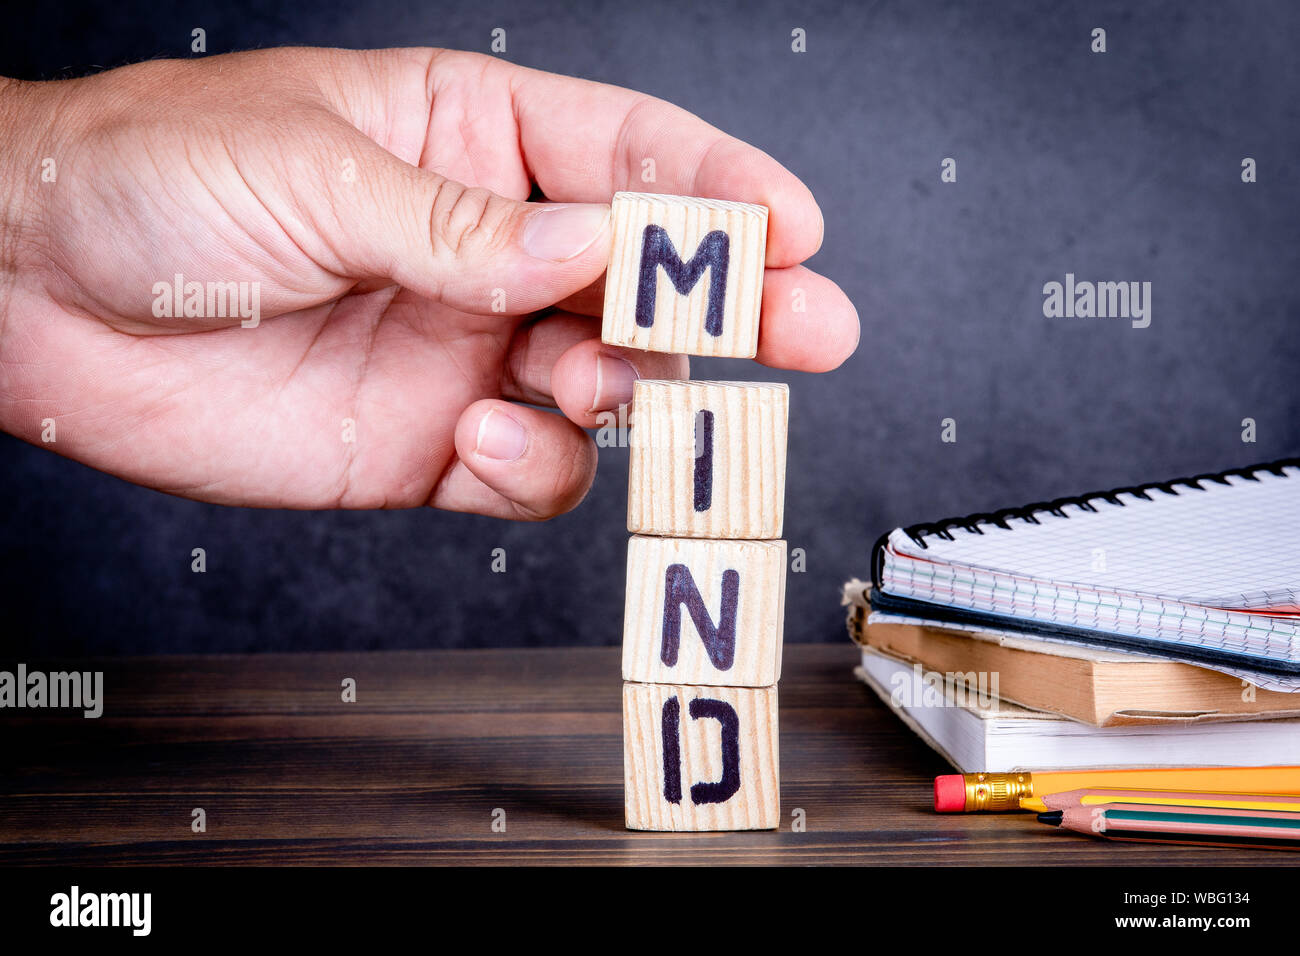 Mind. Skills, education and learning concept Stock Photo